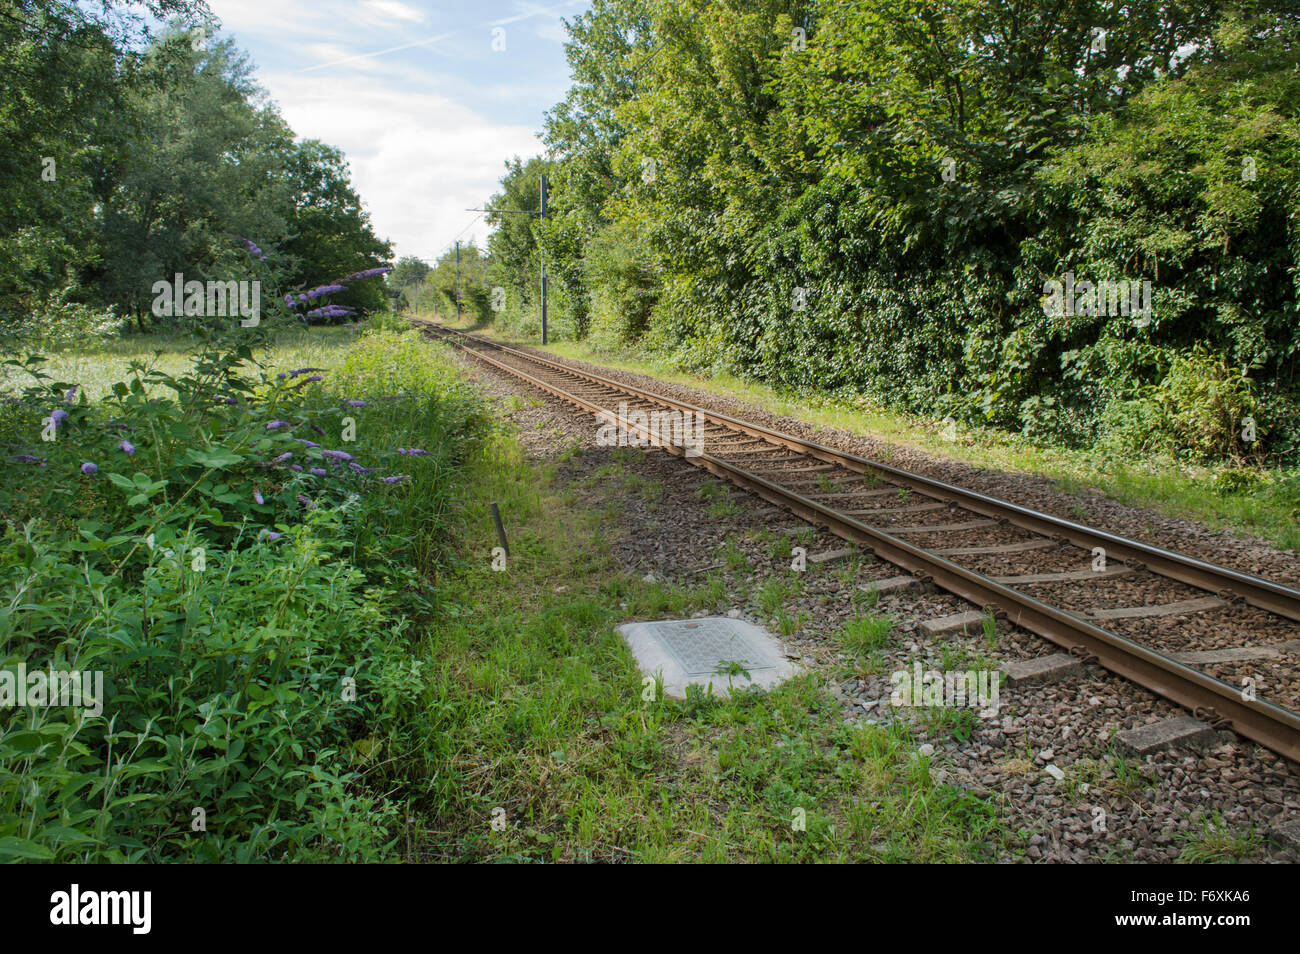 An old, rusty railway track surrounded by overgrown greenery. Stock Photo